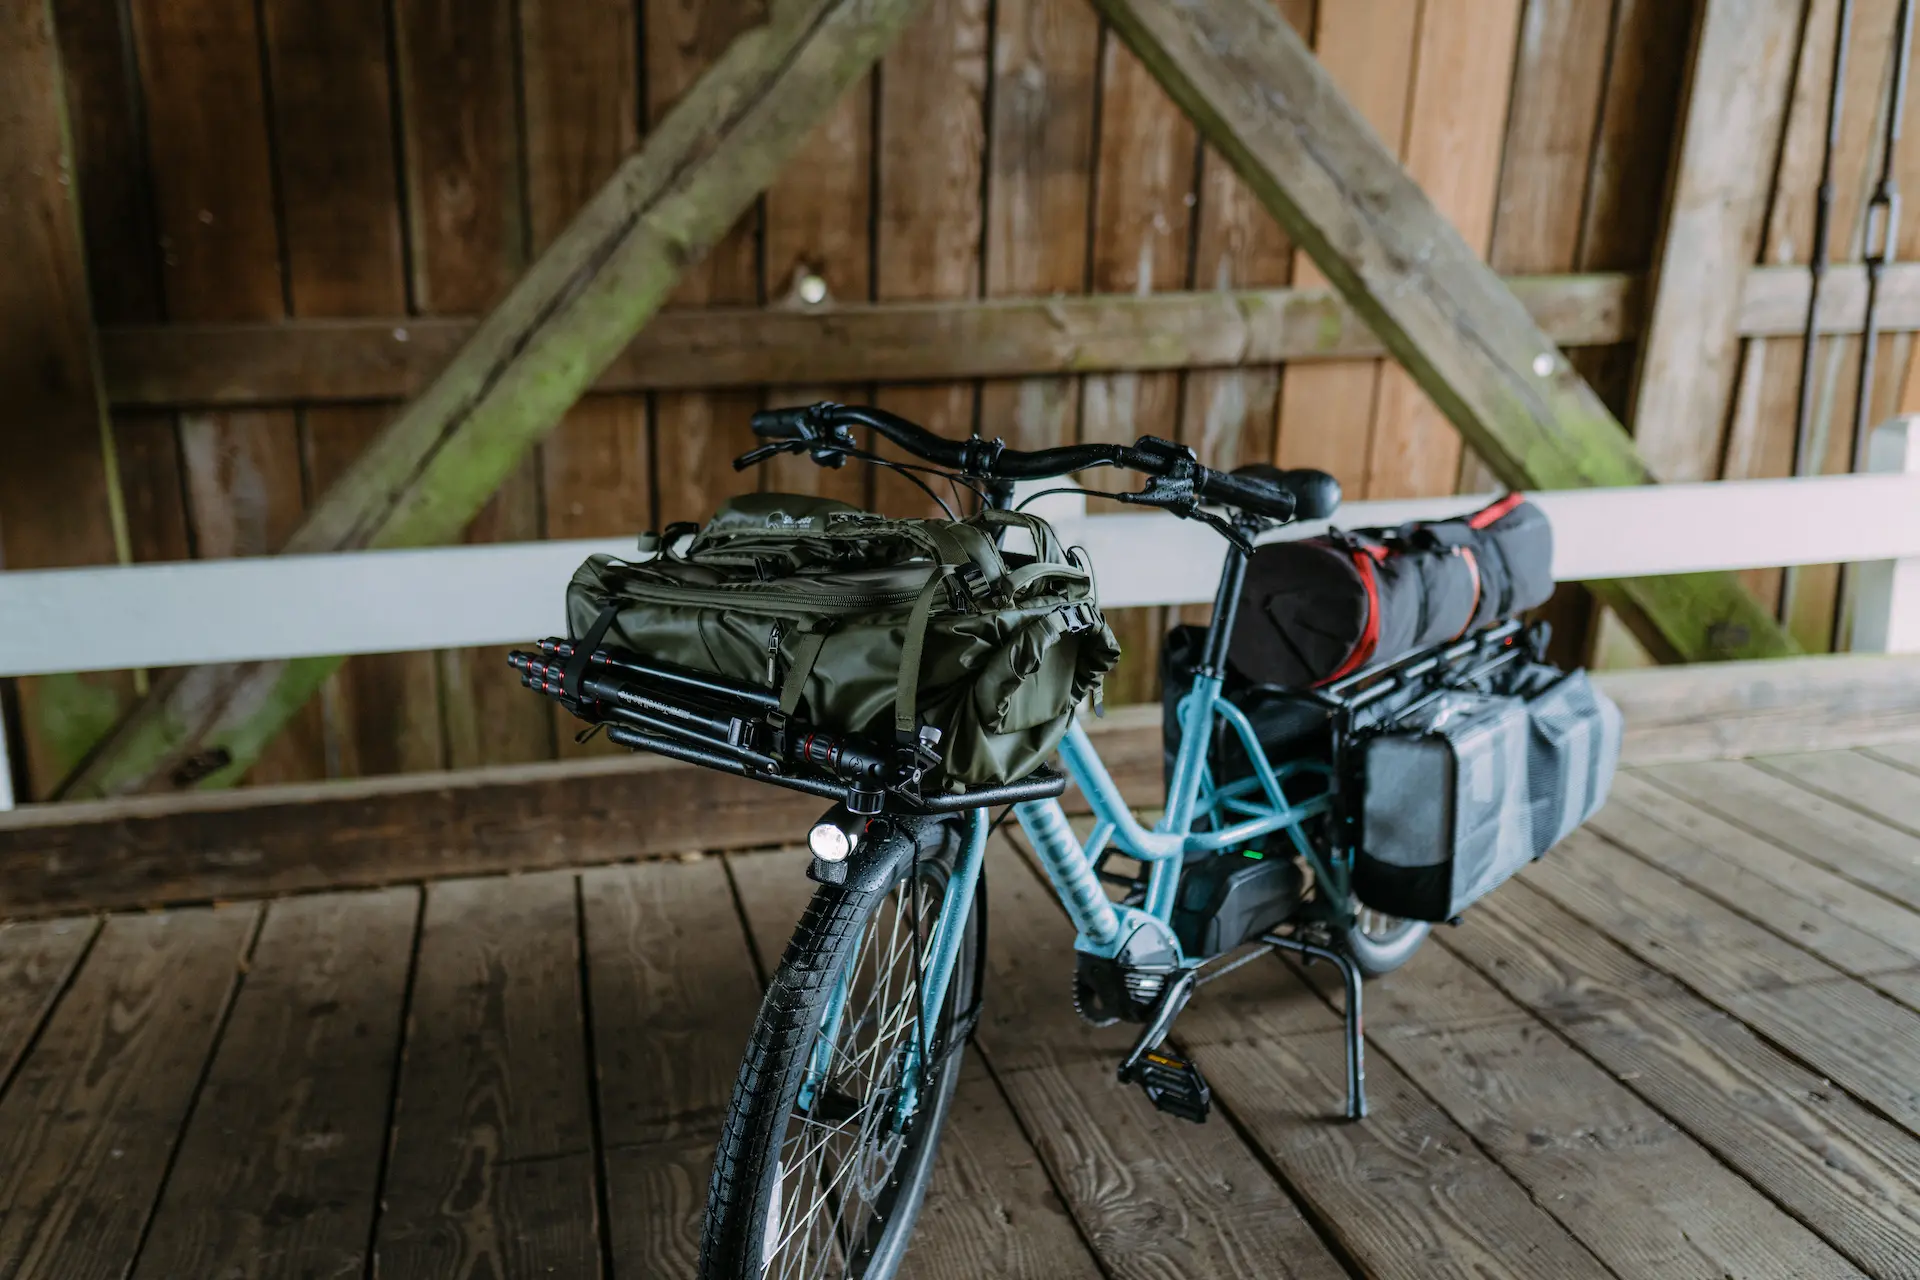 Xtracycle Swoop long-tail electric cargo bike carrying bags on the front and rear racks